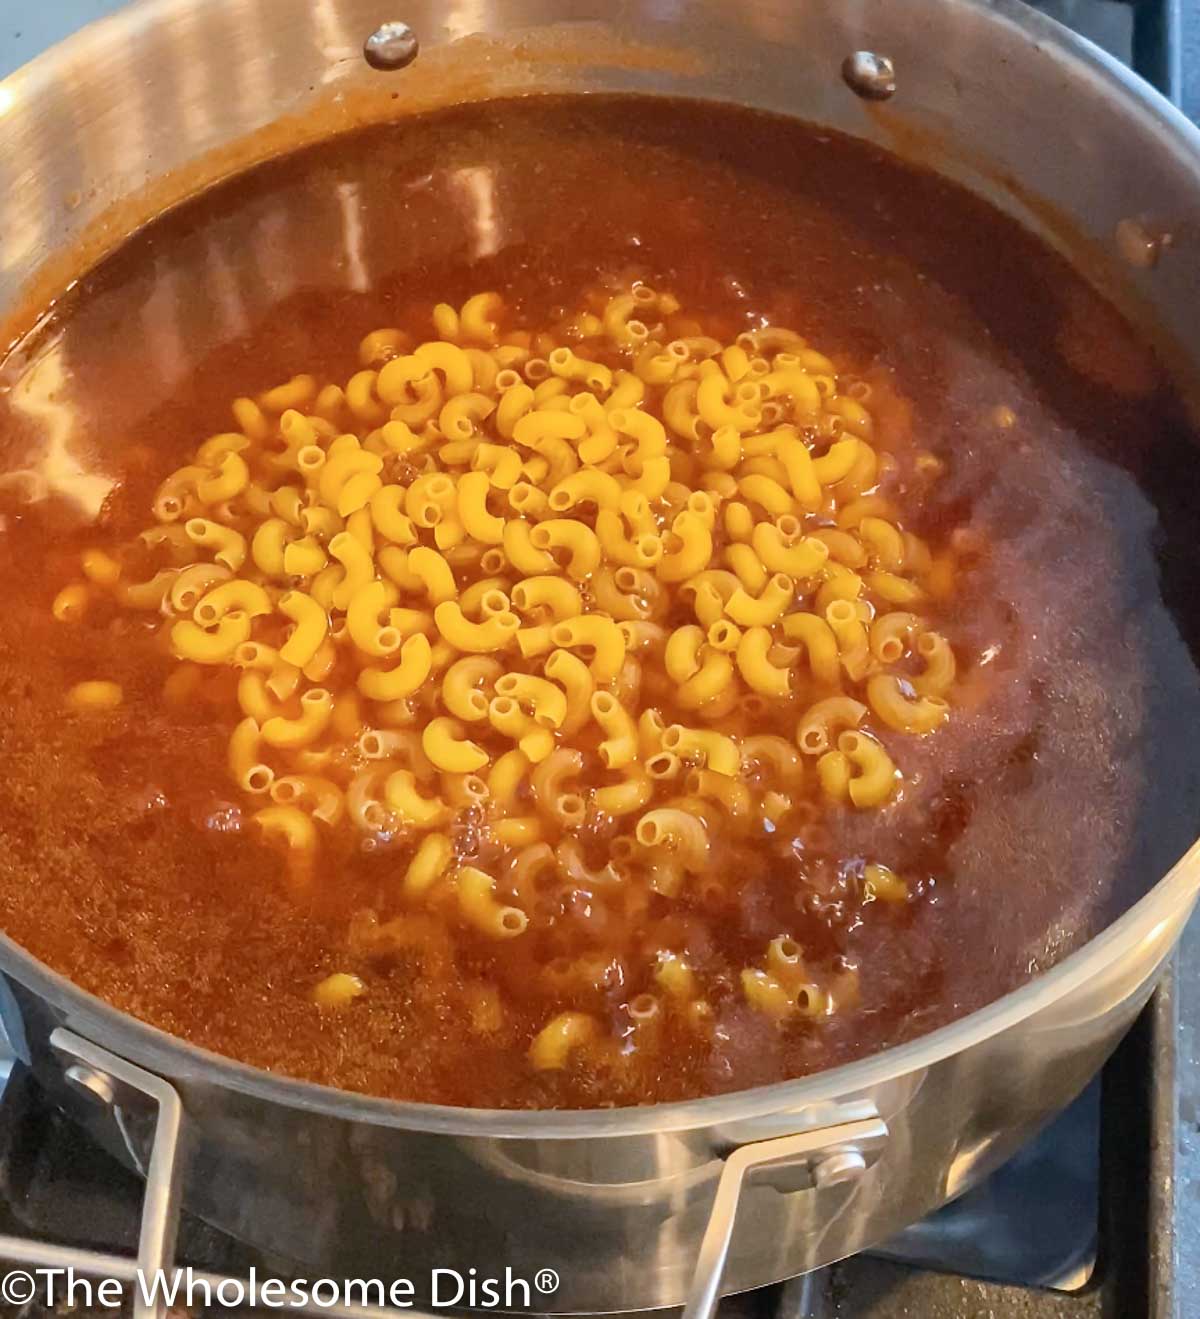 Uncooked macaroni pasta added to chili in a pot.